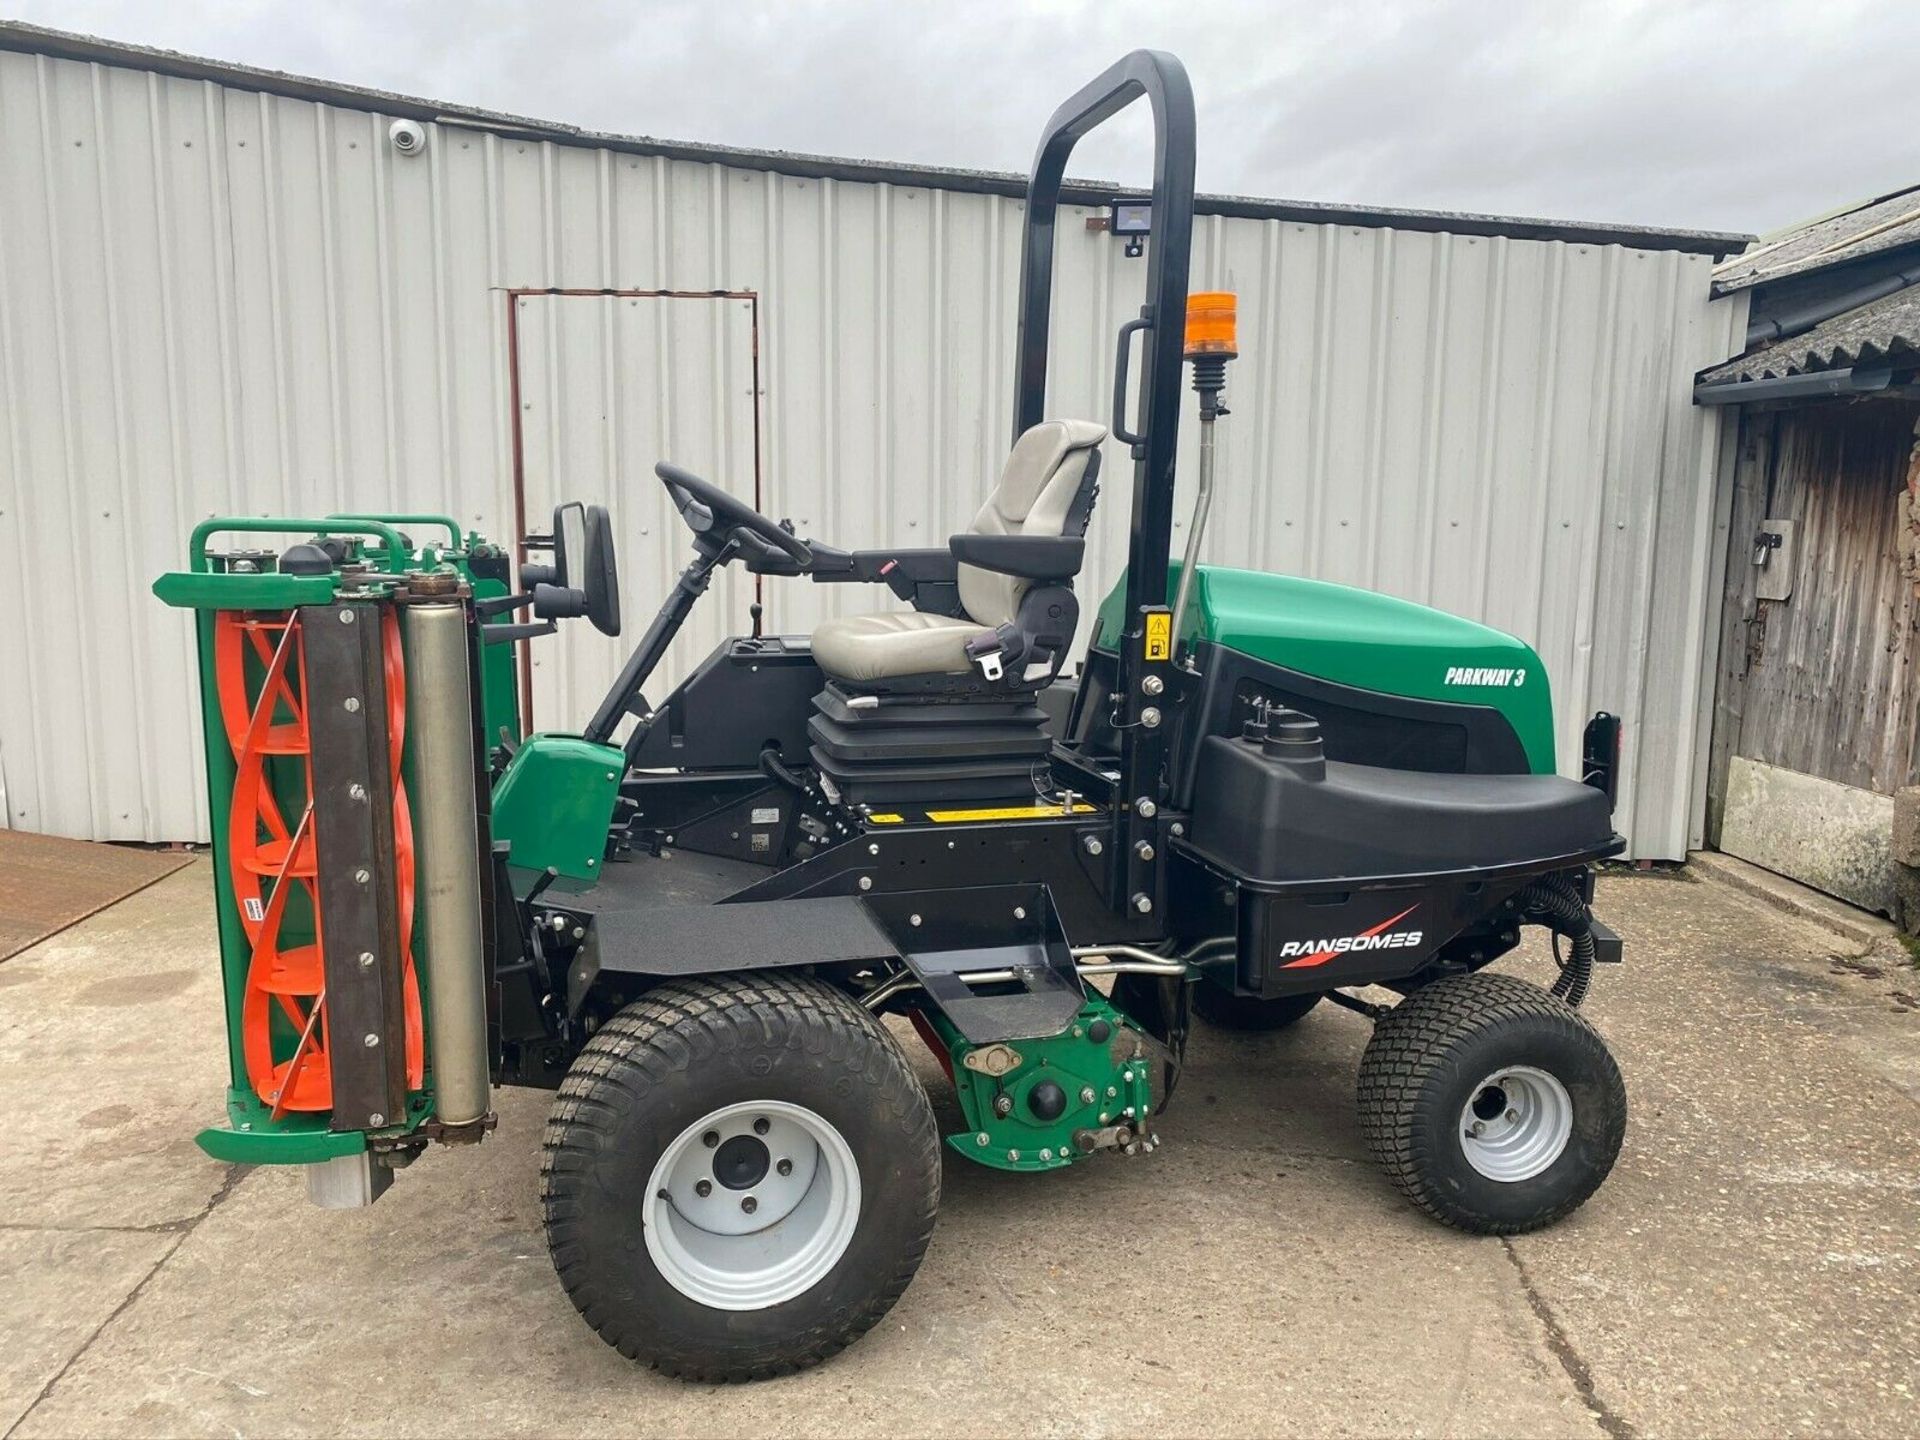 IMMACULATE! RANSOMES PARKWAY 3 TRIPLE CYLINDER MOWER, ONLY 953 HOURS, YEAR 2015, NEW CYLINDERS ETC - Image 3 of 10